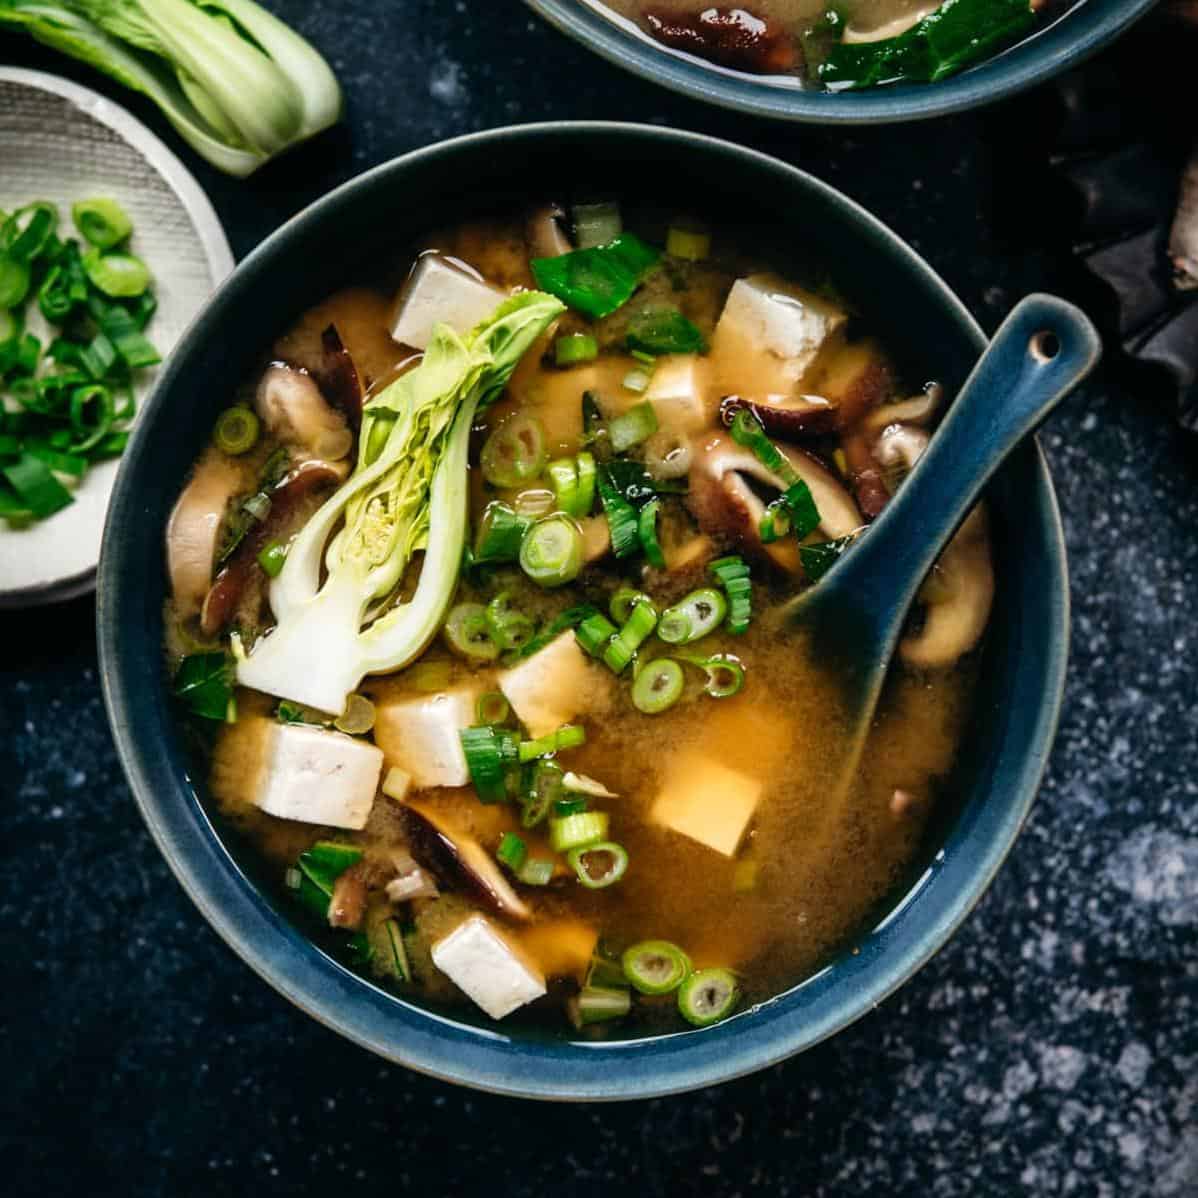  Take a deep breath, and let the aroma of savory broth filled with veggies and tofu revitalize you.